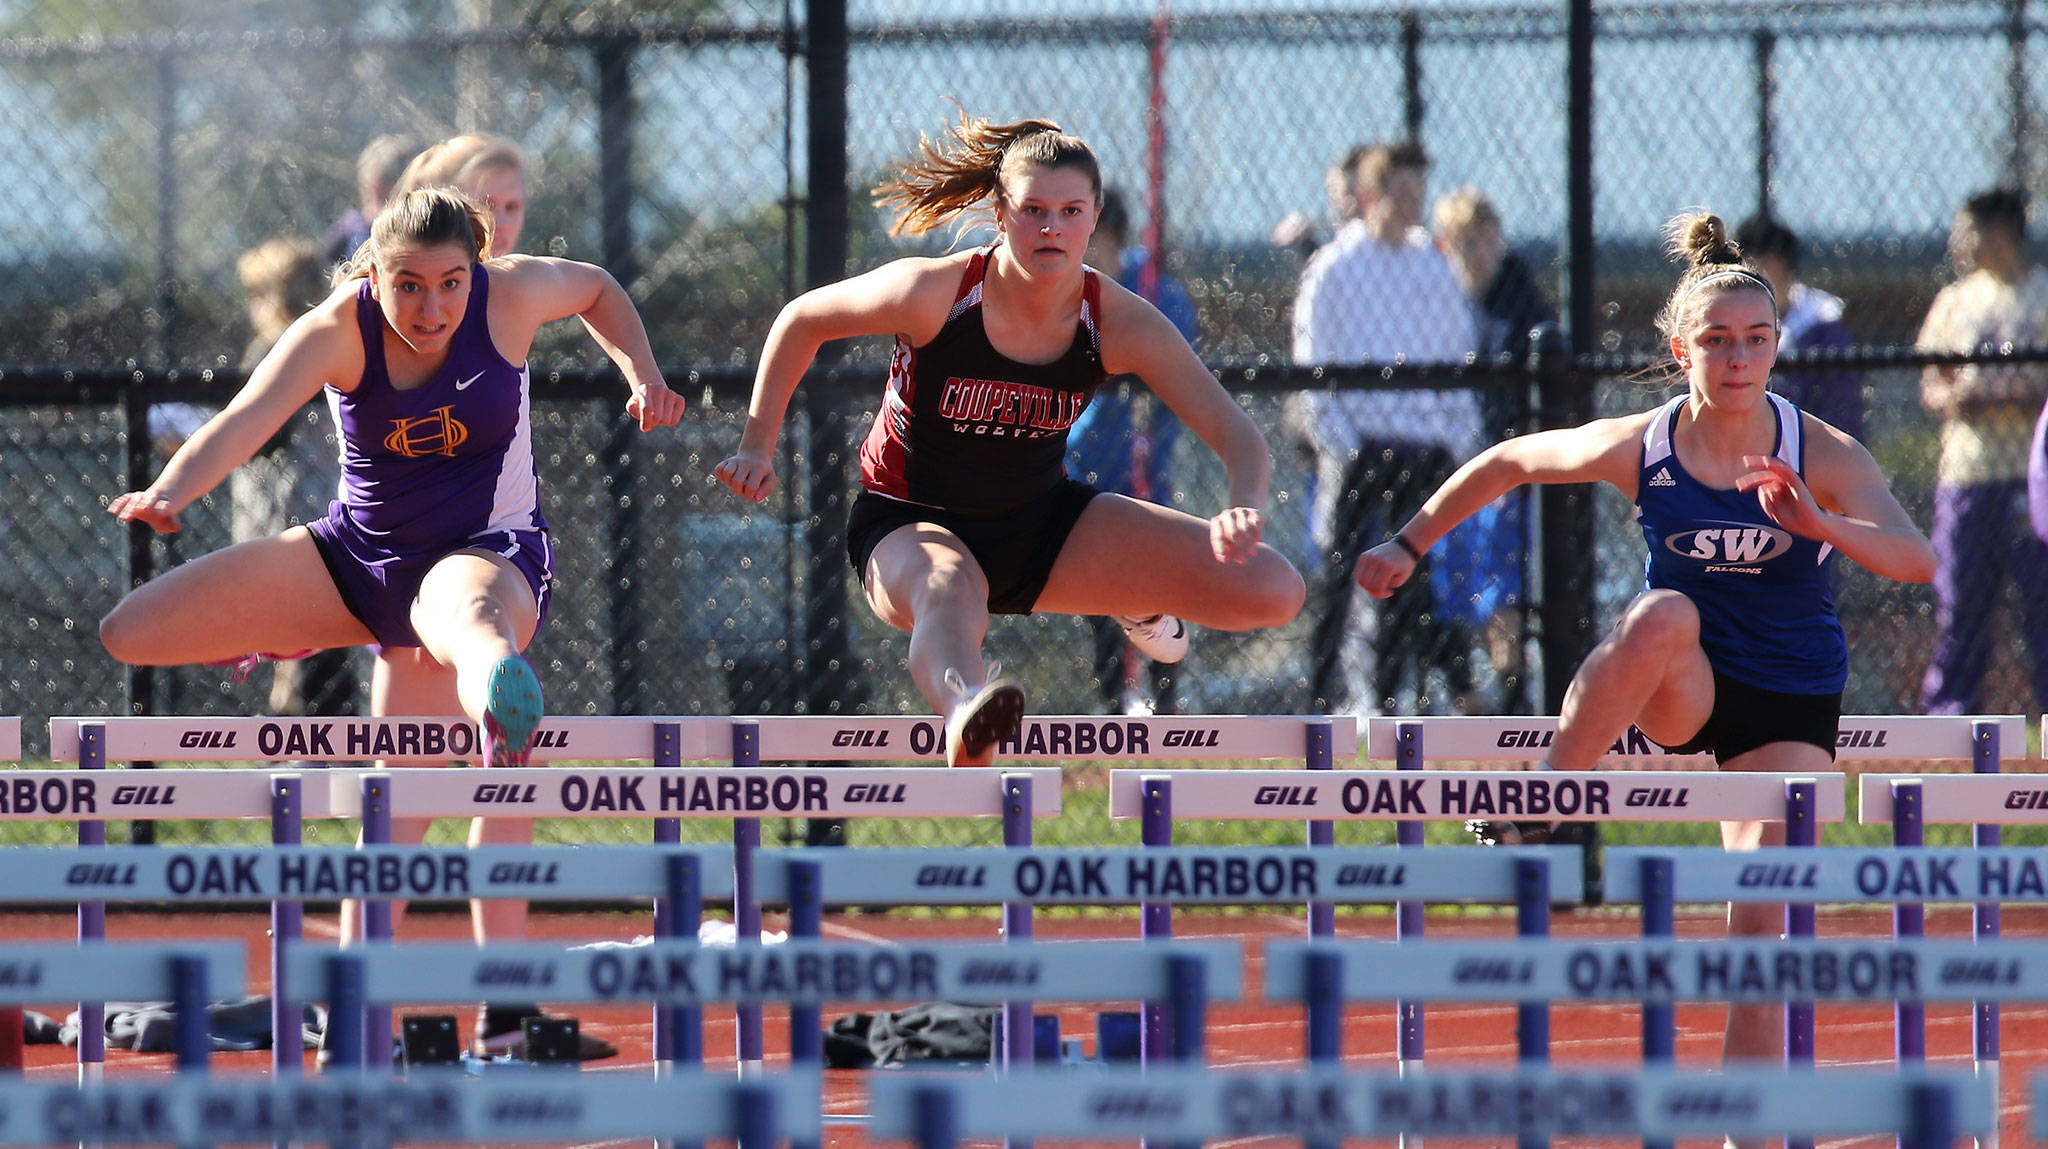 South Whidbey’s Sophia Nielsen, right, takes an early lead over Oak Harbor’s Samantha Hines, left, and Coupeville’s Lindsey Roberts on the way to winning the 100 hurdles. (Photo by John Fisken)